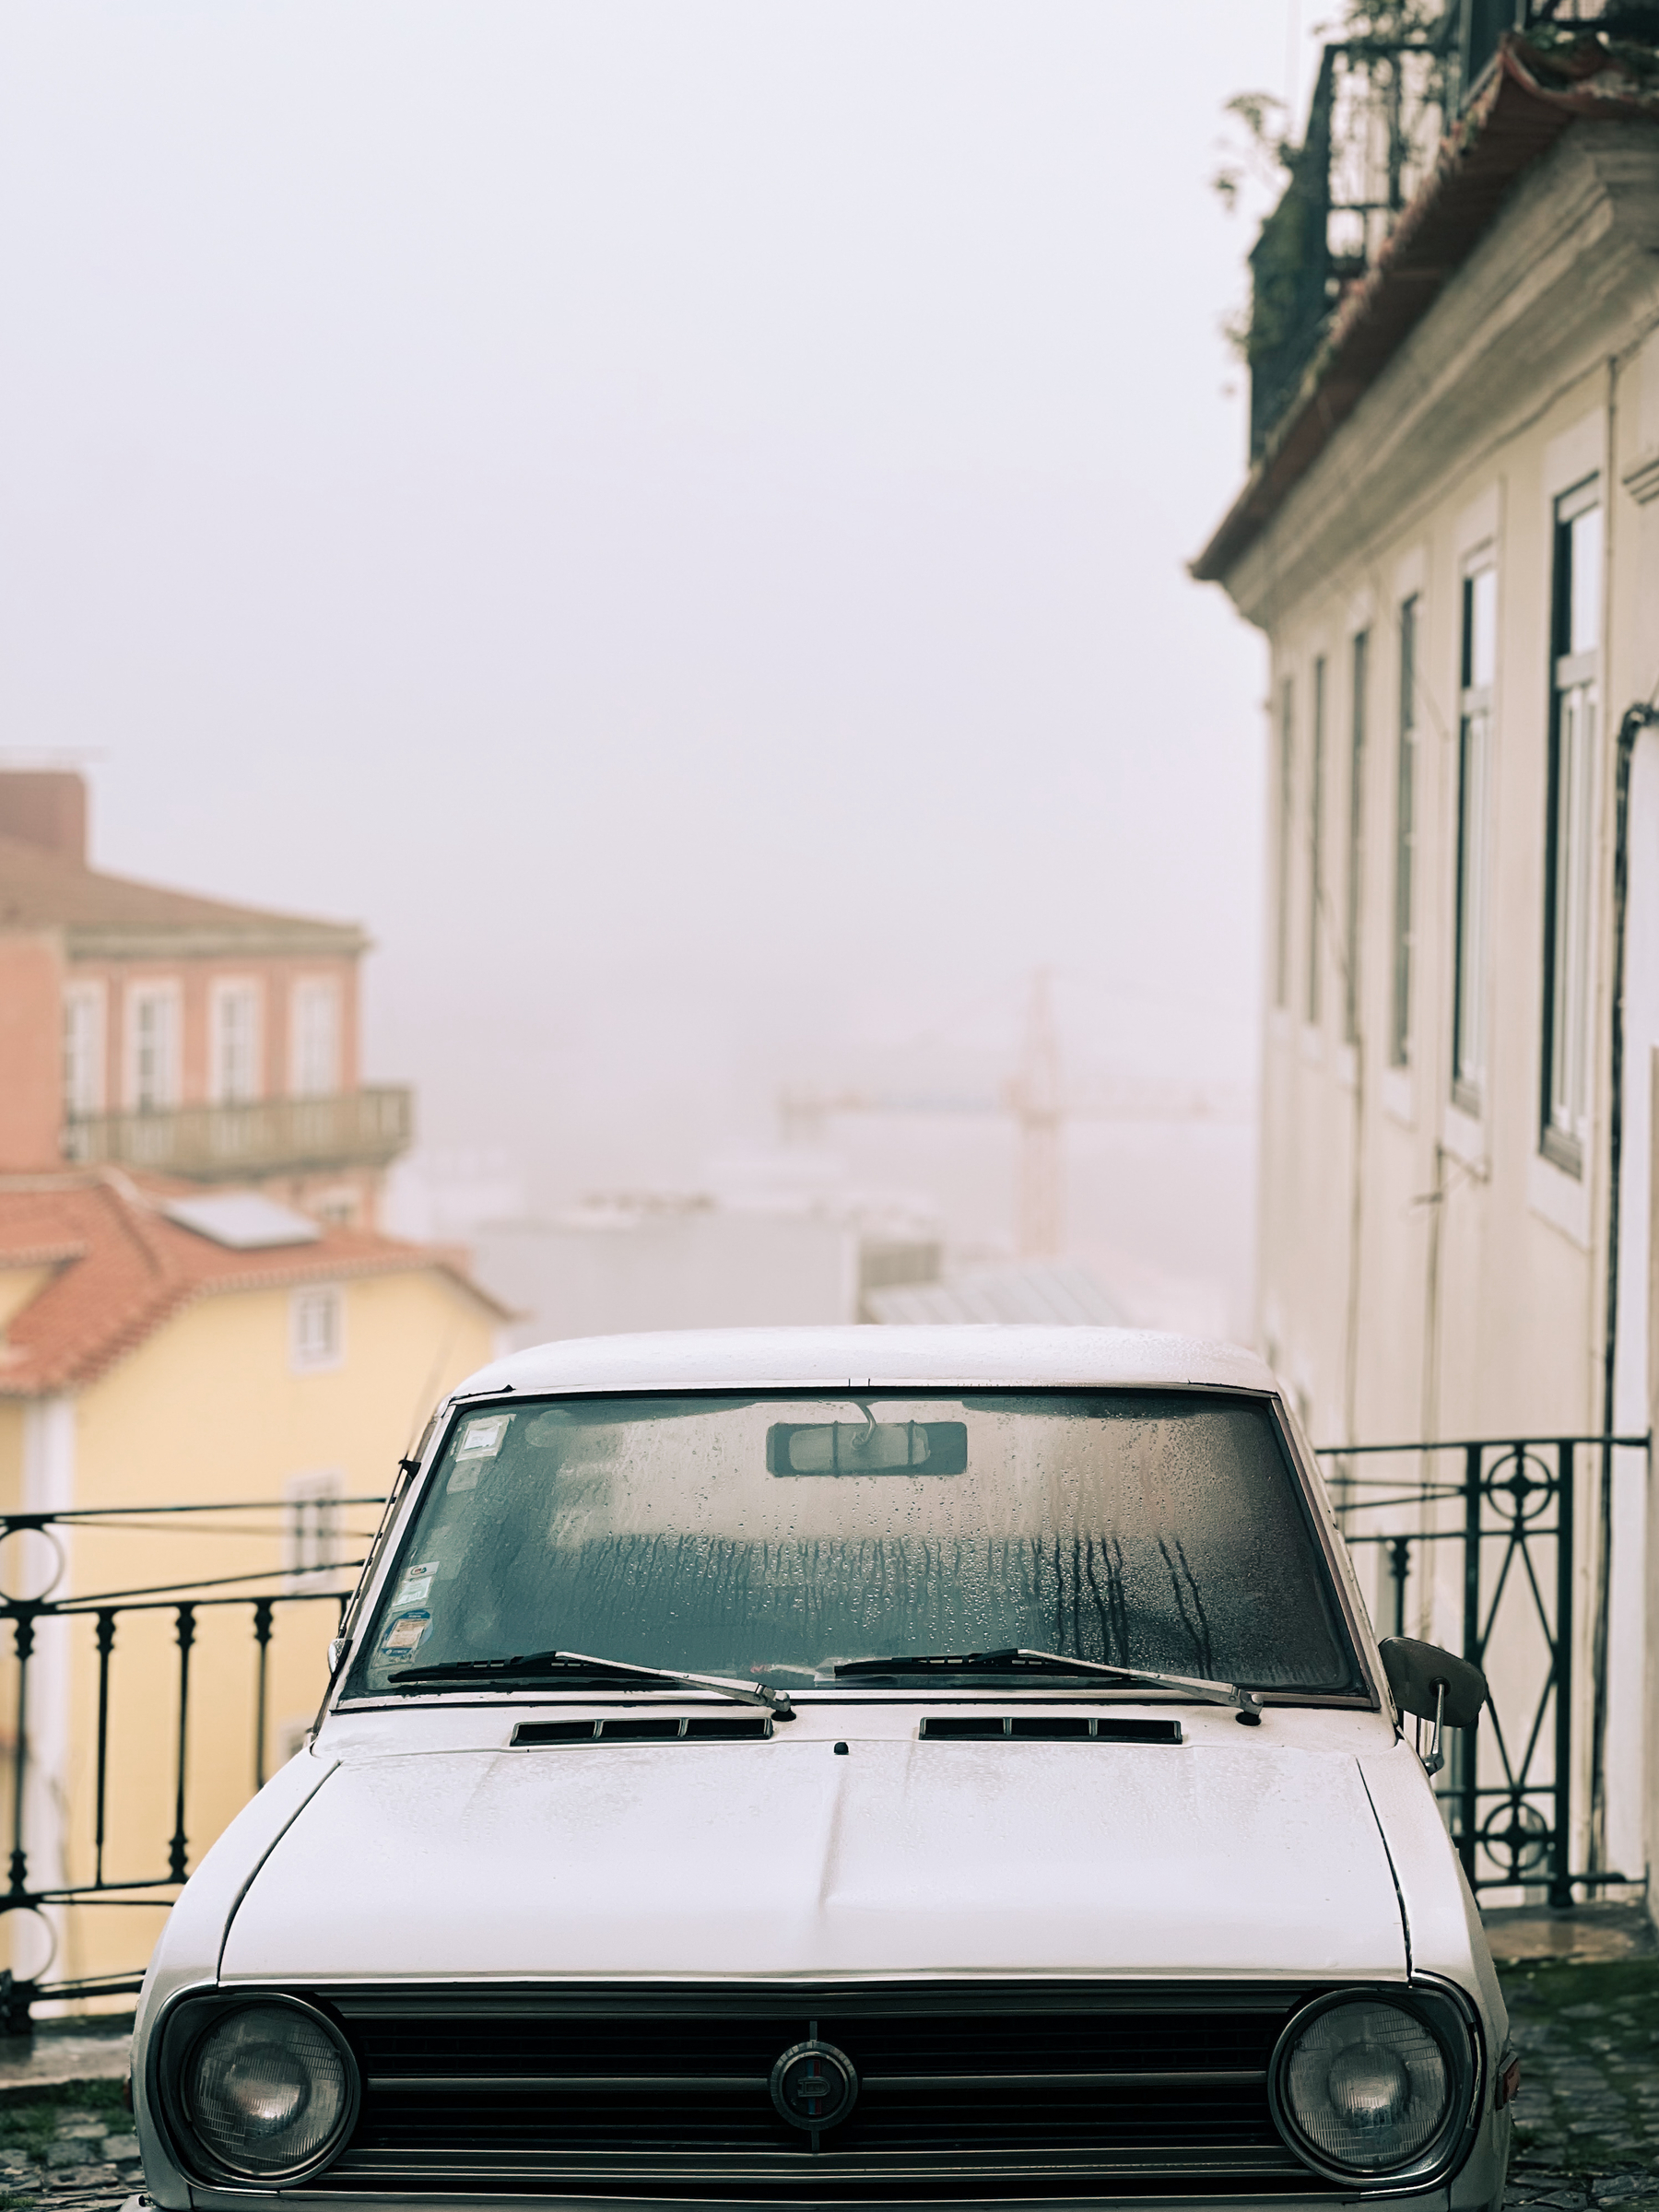 A vintage white car parked on a cobblestone street next to a building with railings, with a foggy cityscape in the background.